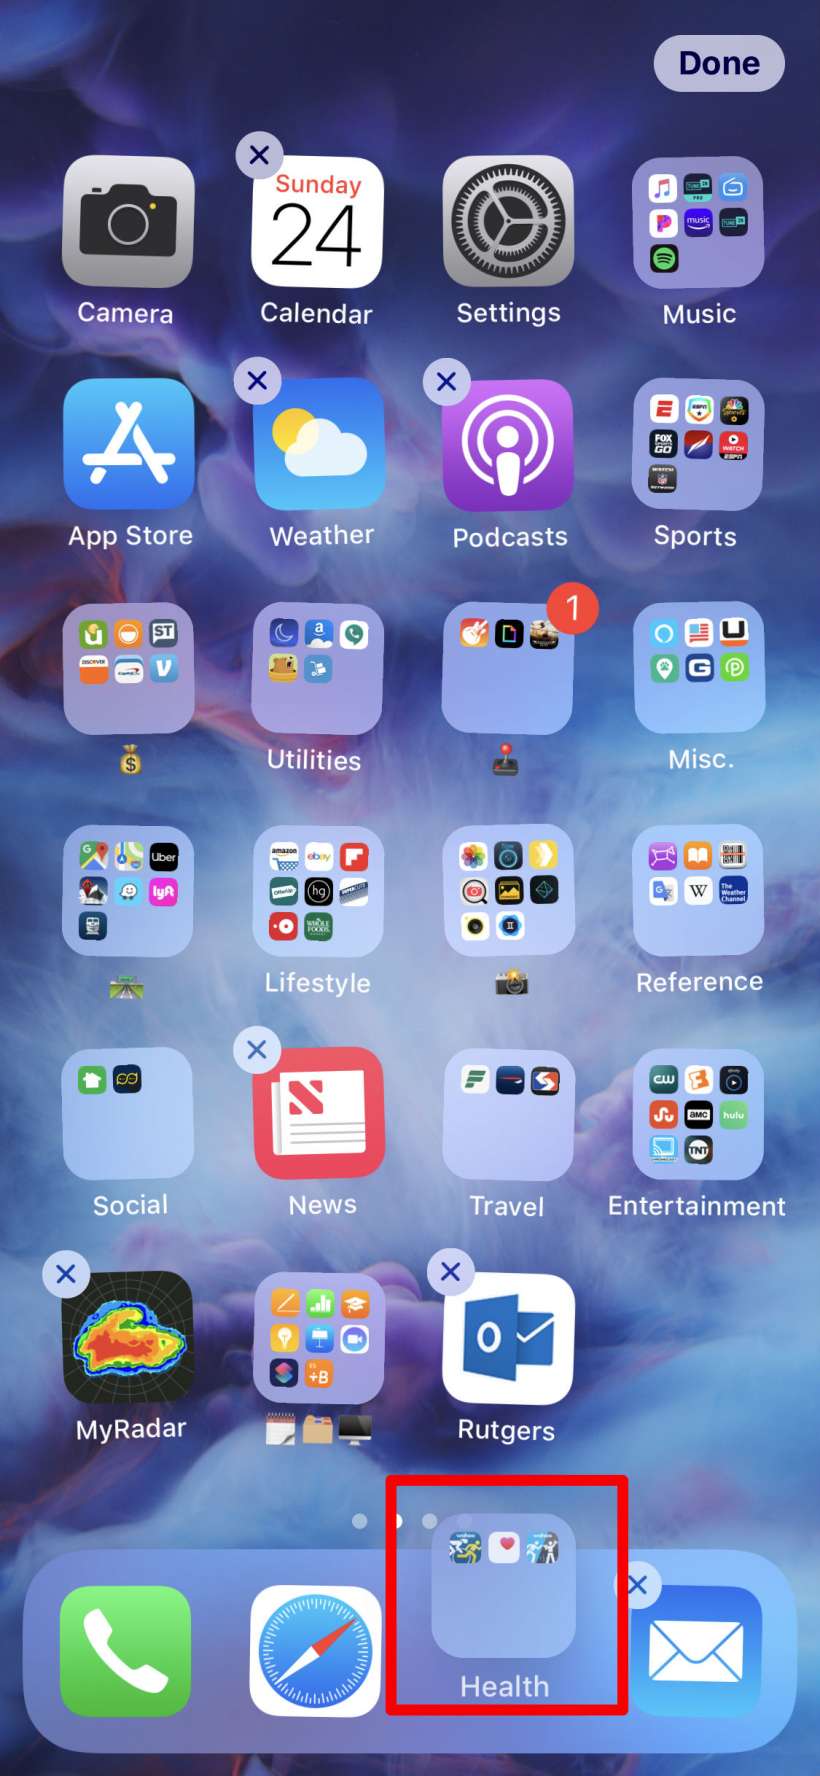 How to put a folder on your iPhone or iPad dock.